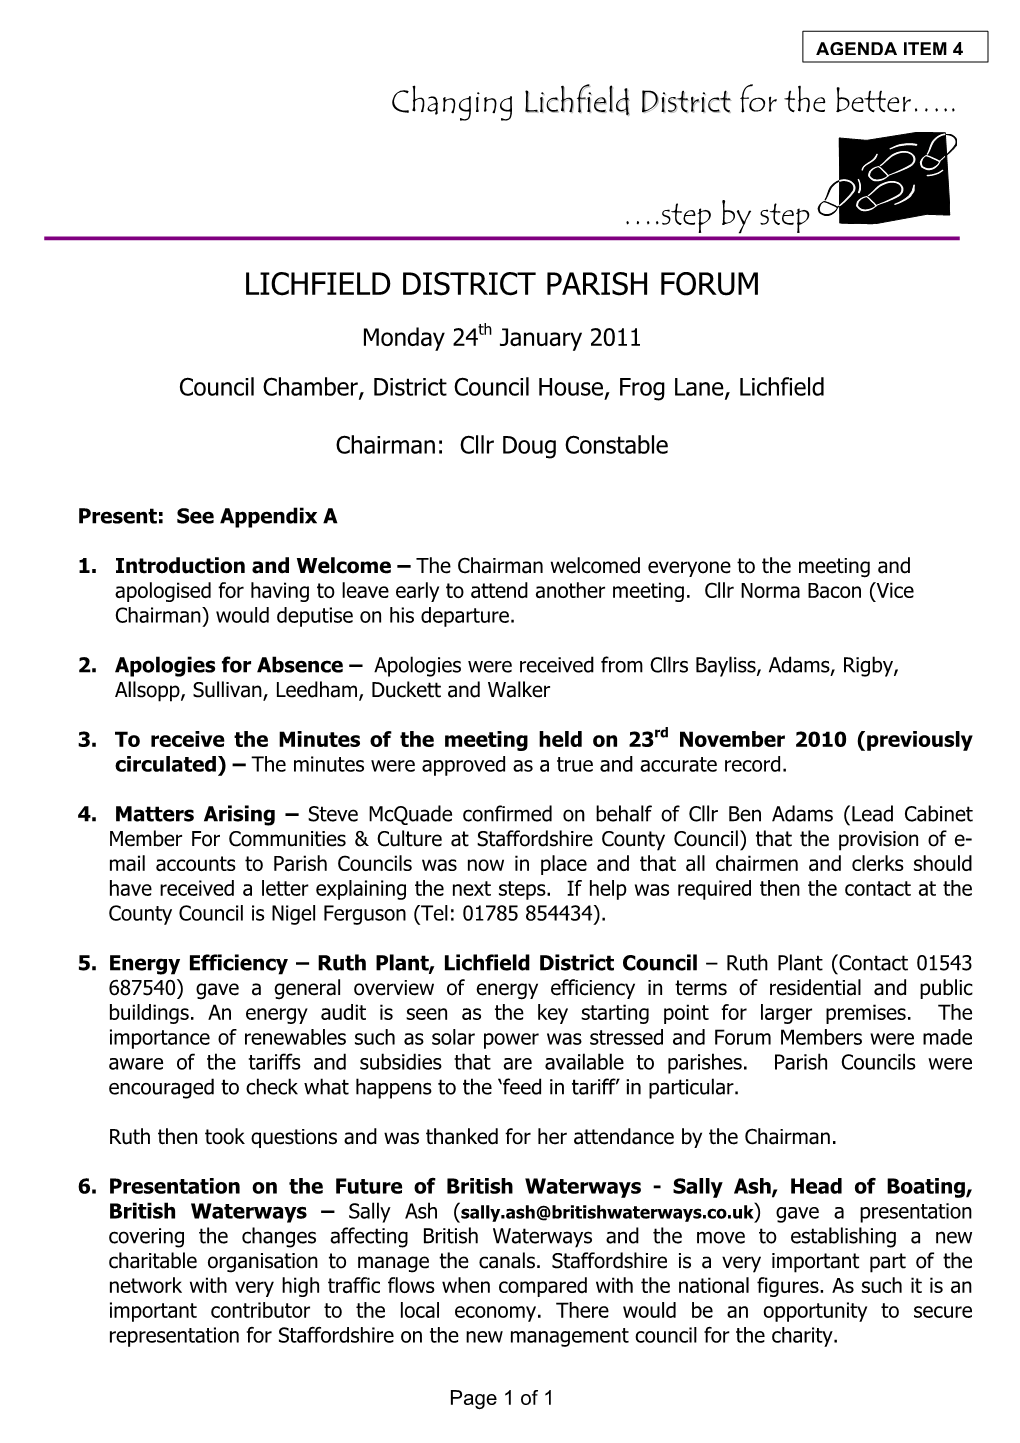 Changing Lichfield District for the Better…